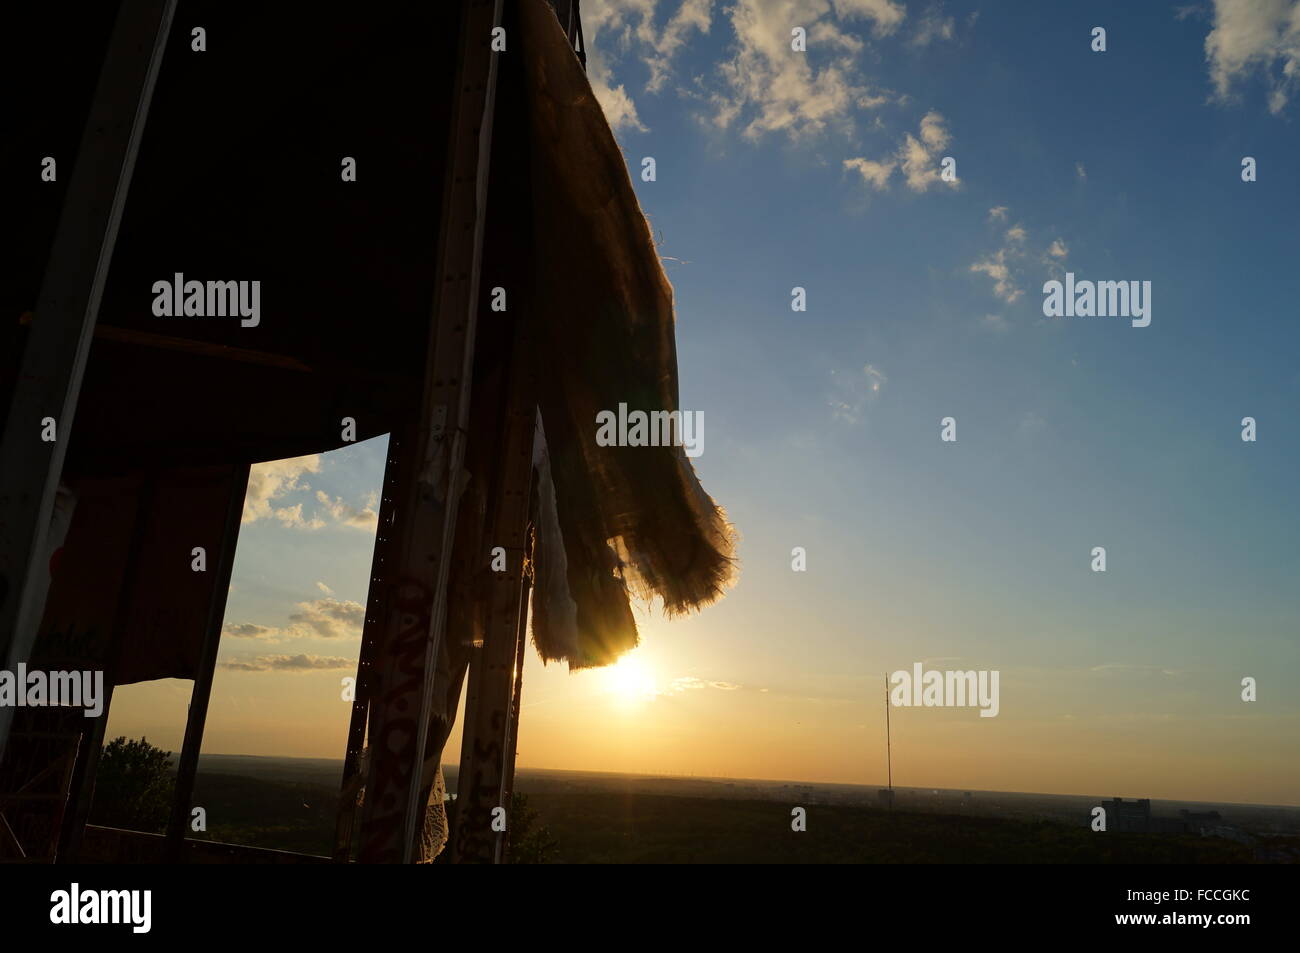 Cropped Built Structure At Sunset Stock Photo